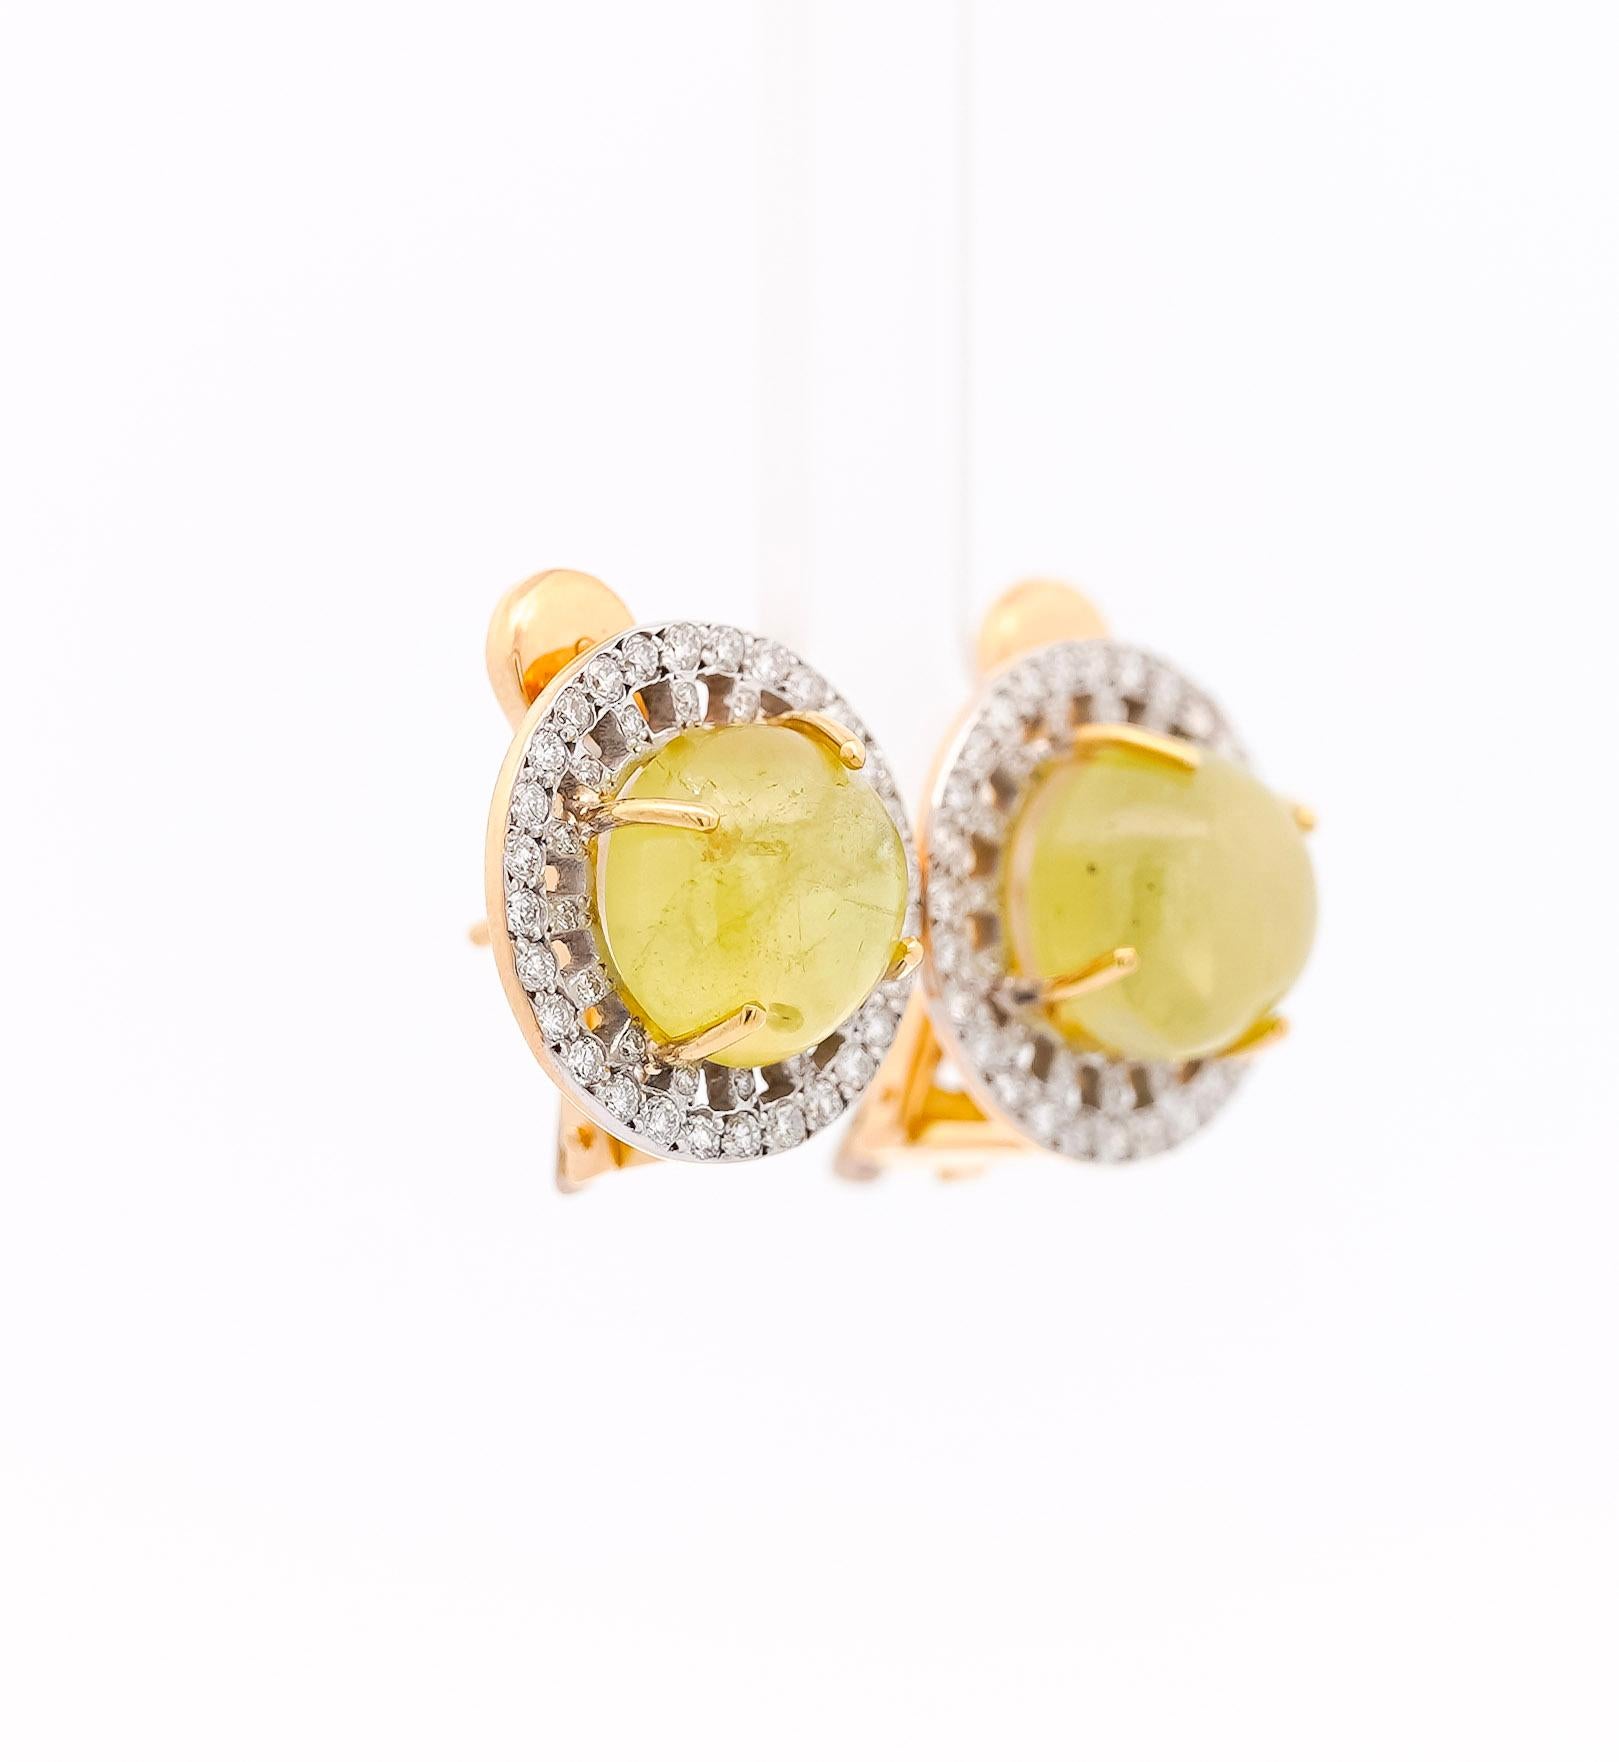 Crafted in 18K yellow gold, these earrings showcase a 10-carat total weight of captivating greenish-yellow chrysoberyl. Each 9mm cabochon-cut gemstone shimmers with a unique color hue, framed by round-cut diamonds totaling 1.3 carats. Secured by